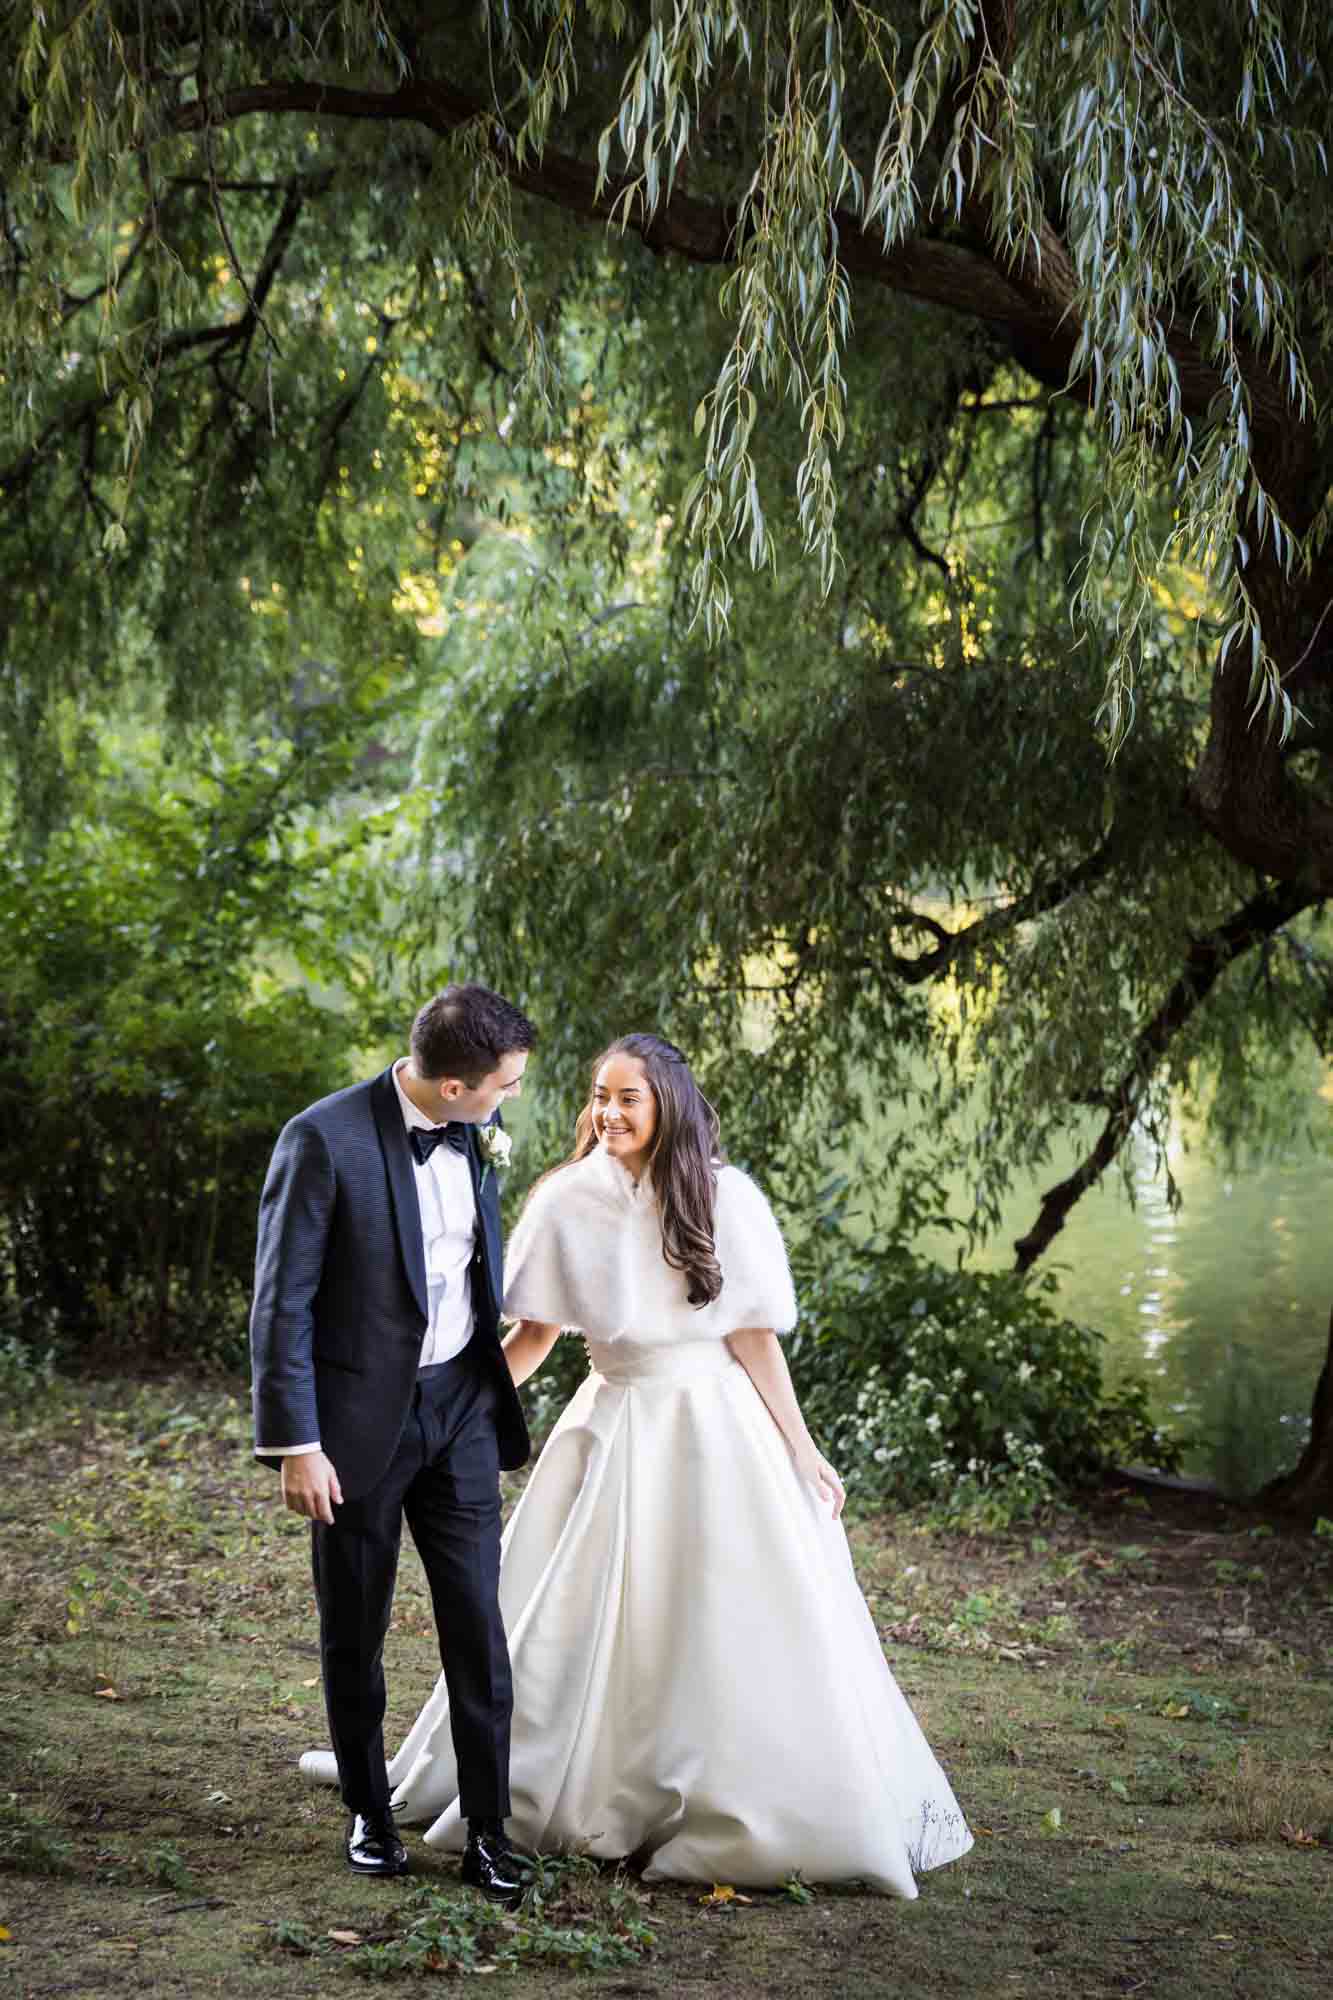 Bride and groom holding hands and walking in front of willow trees